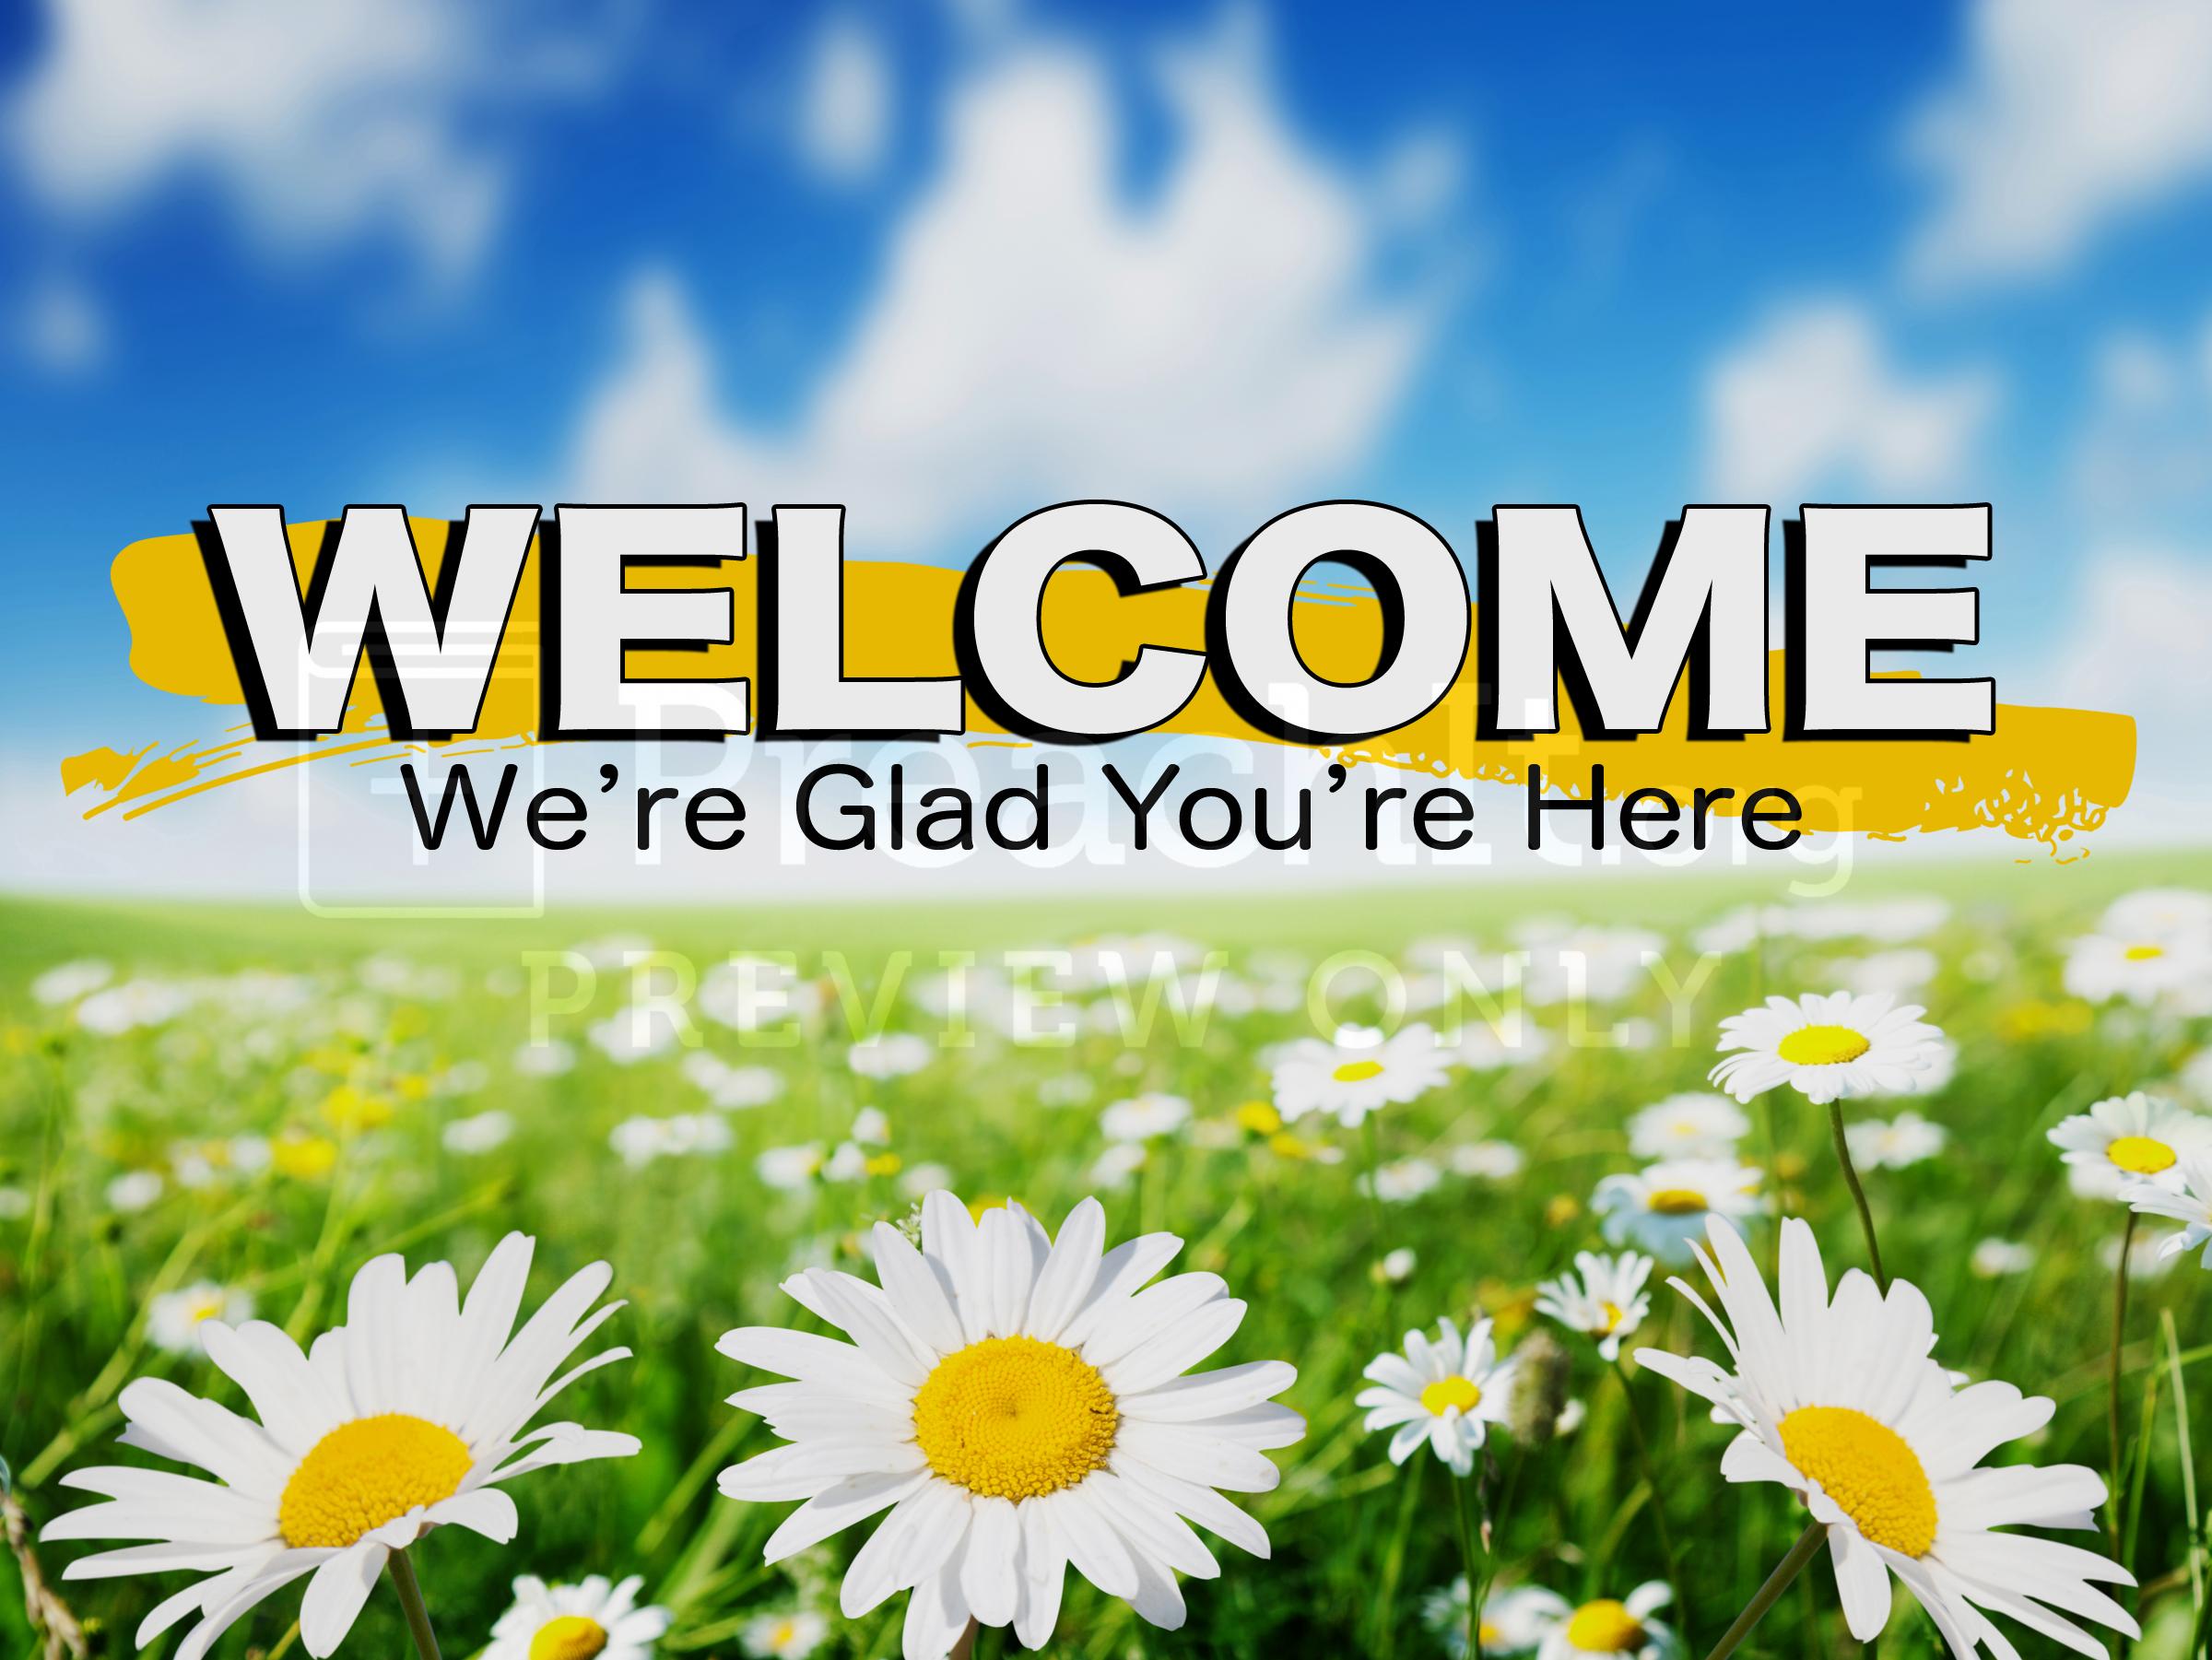 welcome church backgrounds